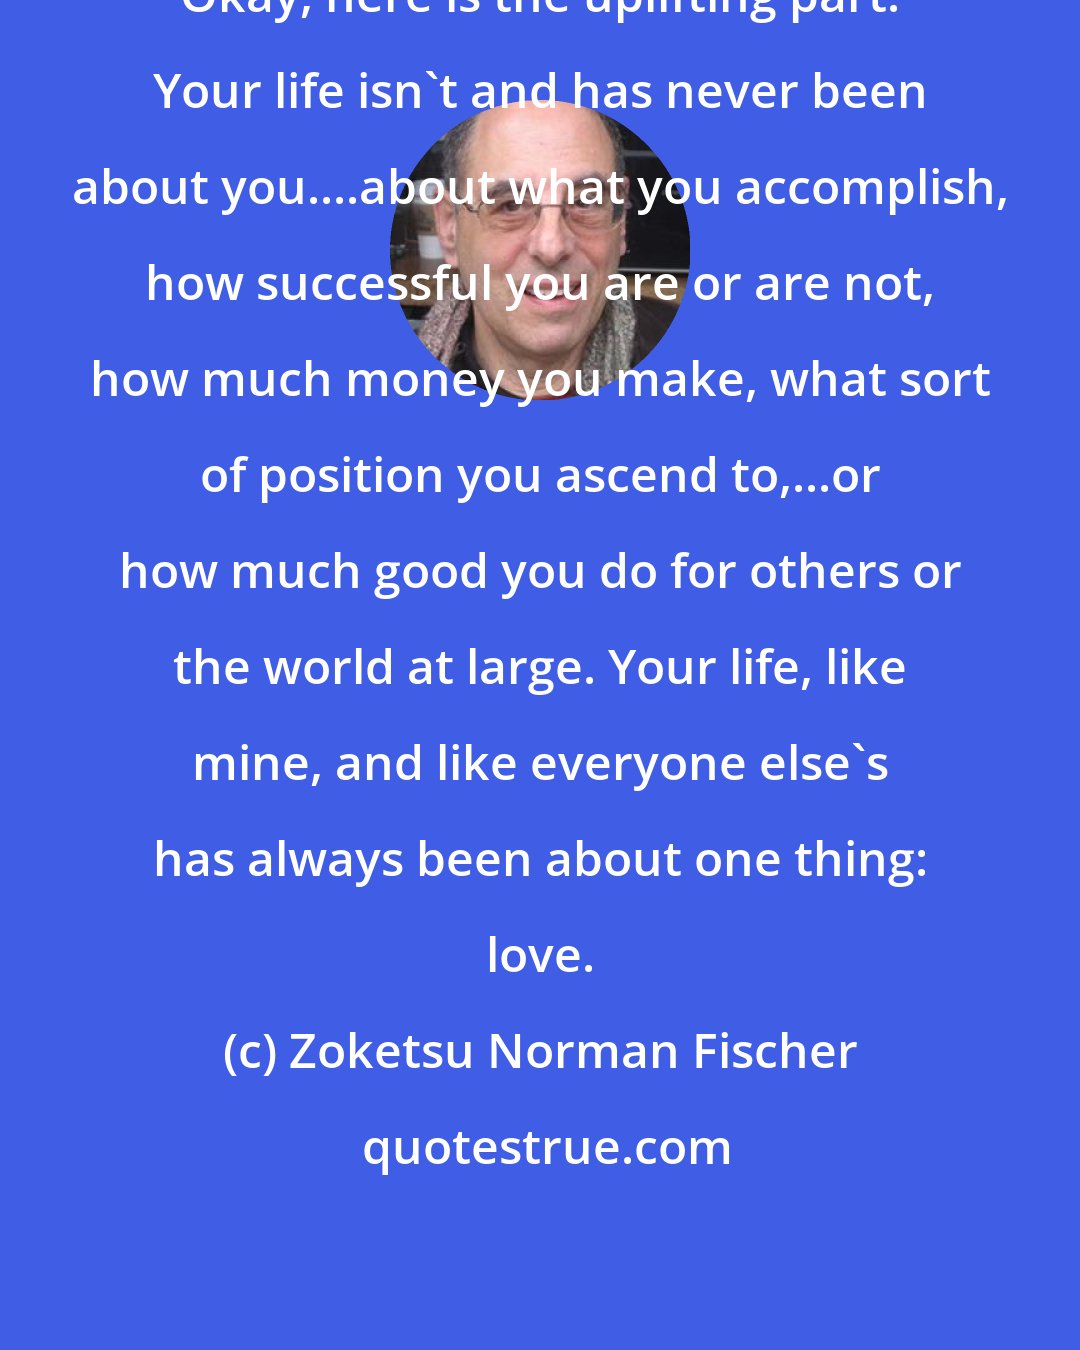 Zoketsu Norman Fischer: Okay, here is the uplifting part: Your life isn't and has never been about you....about what you accomplish, how successful you are or are not, how much money you make, what sort of position you ascend to,...or how much good you do for others or the world at large. Your life, like mine, and like everyone else's has always been about one thing: love.